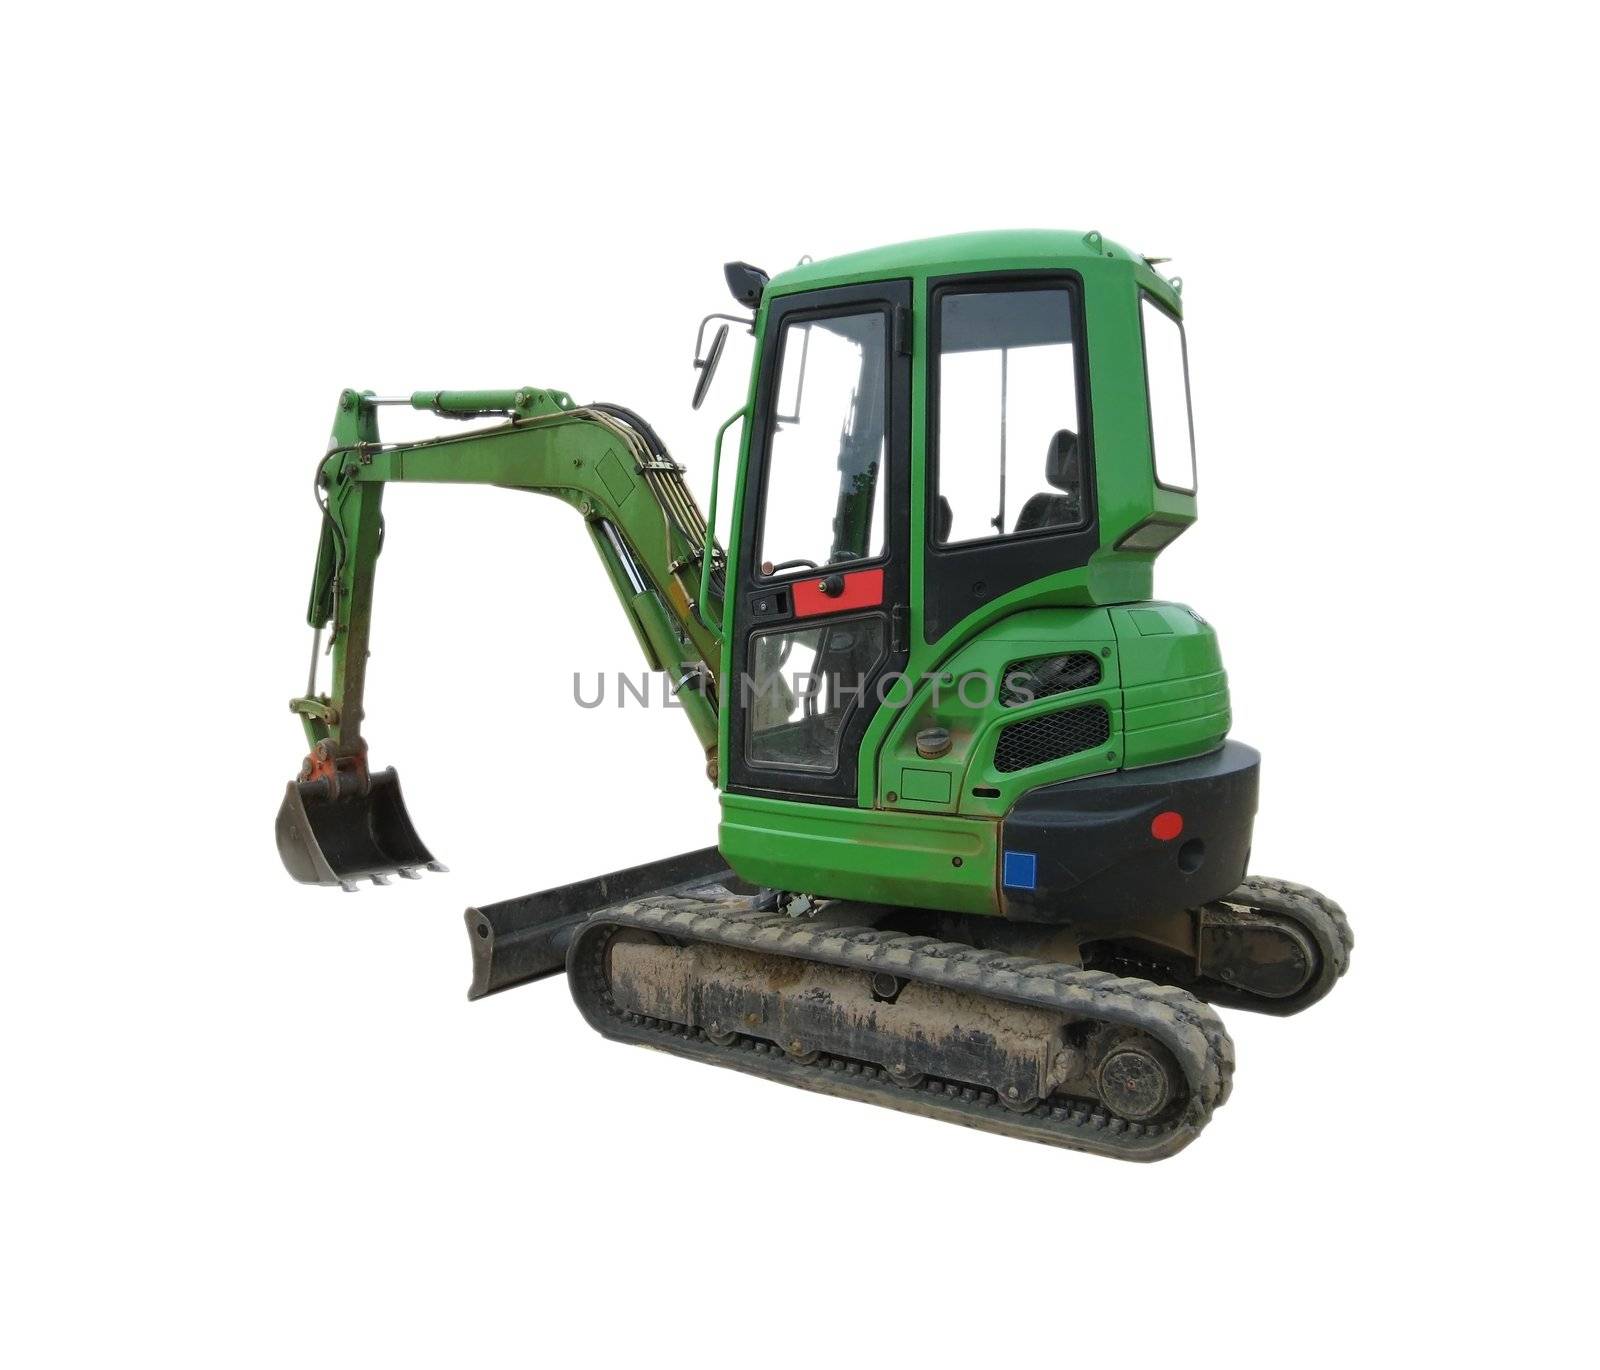 image showing a green excavator with a white background